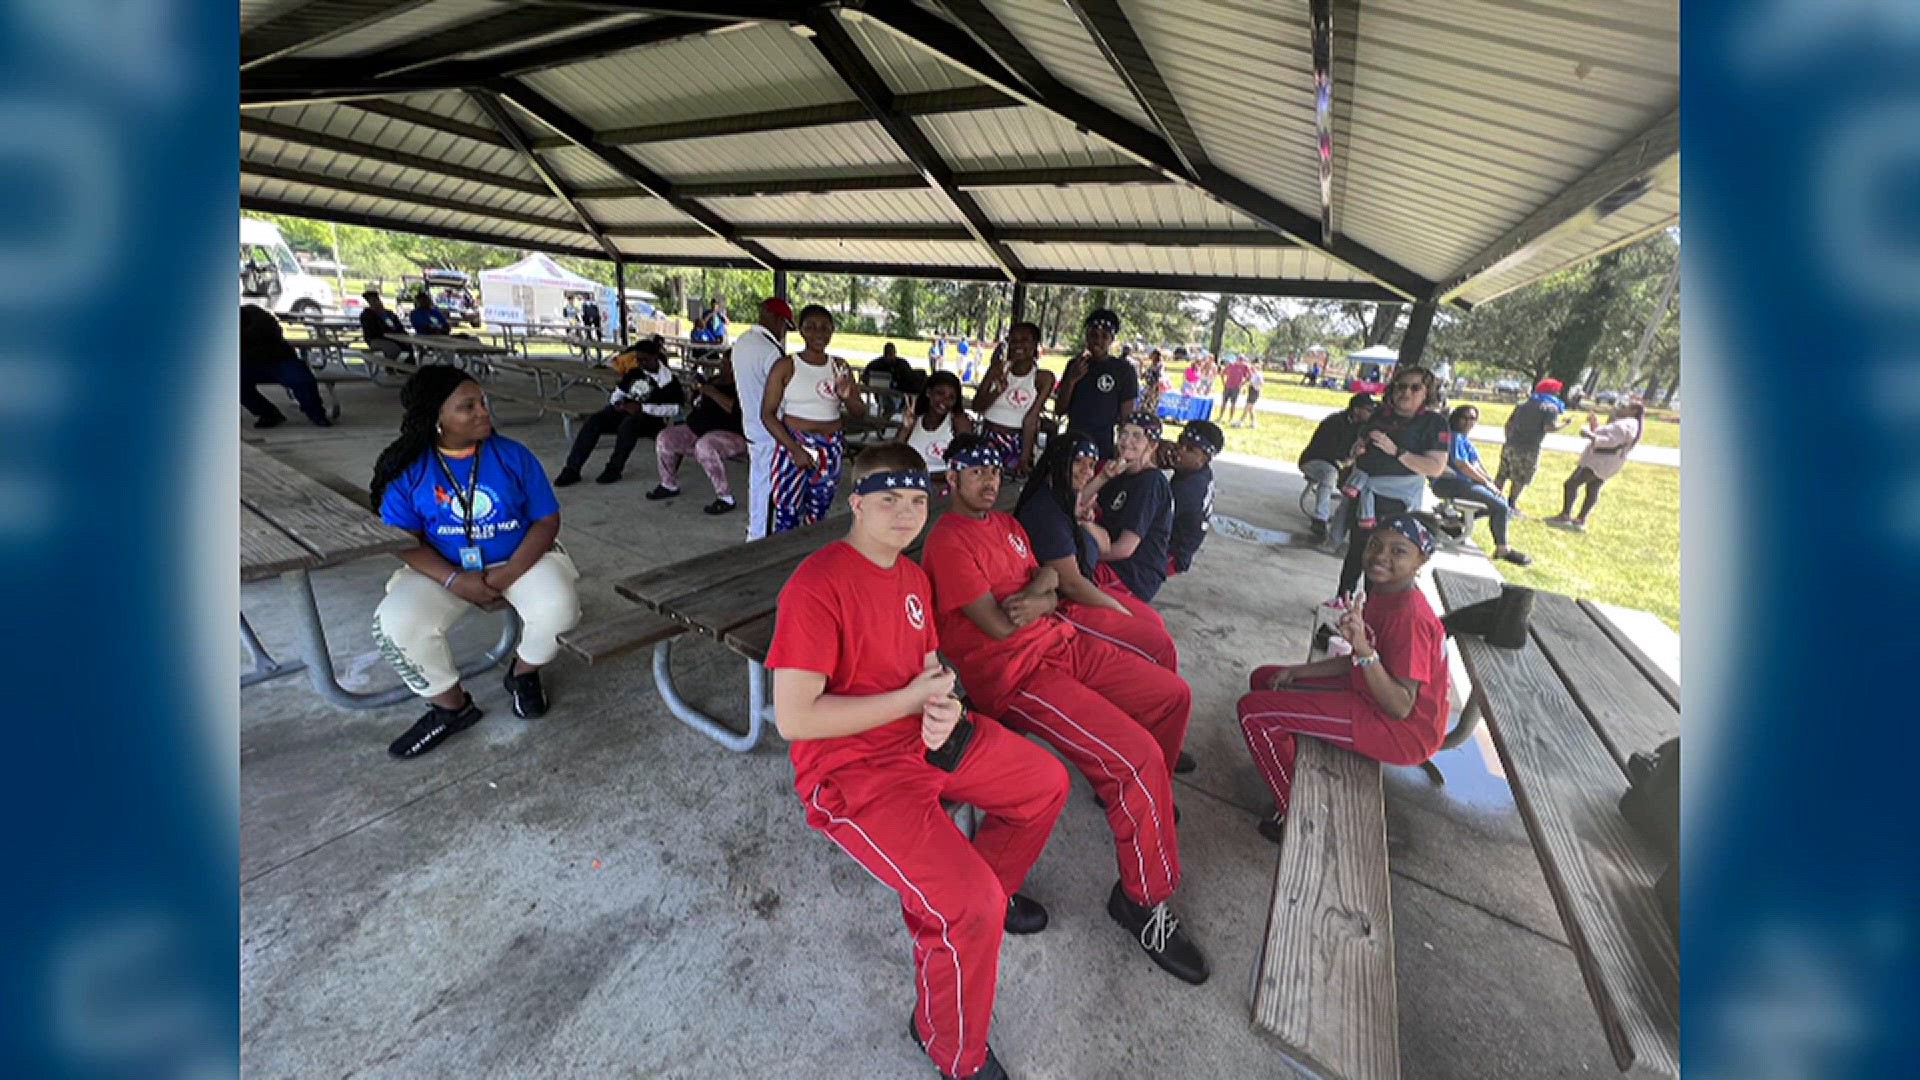 Hopeful Hampton's "Urgency of Now" initiative is kicking off youth violence prevention in Hampton with events designed to combat gun violence.